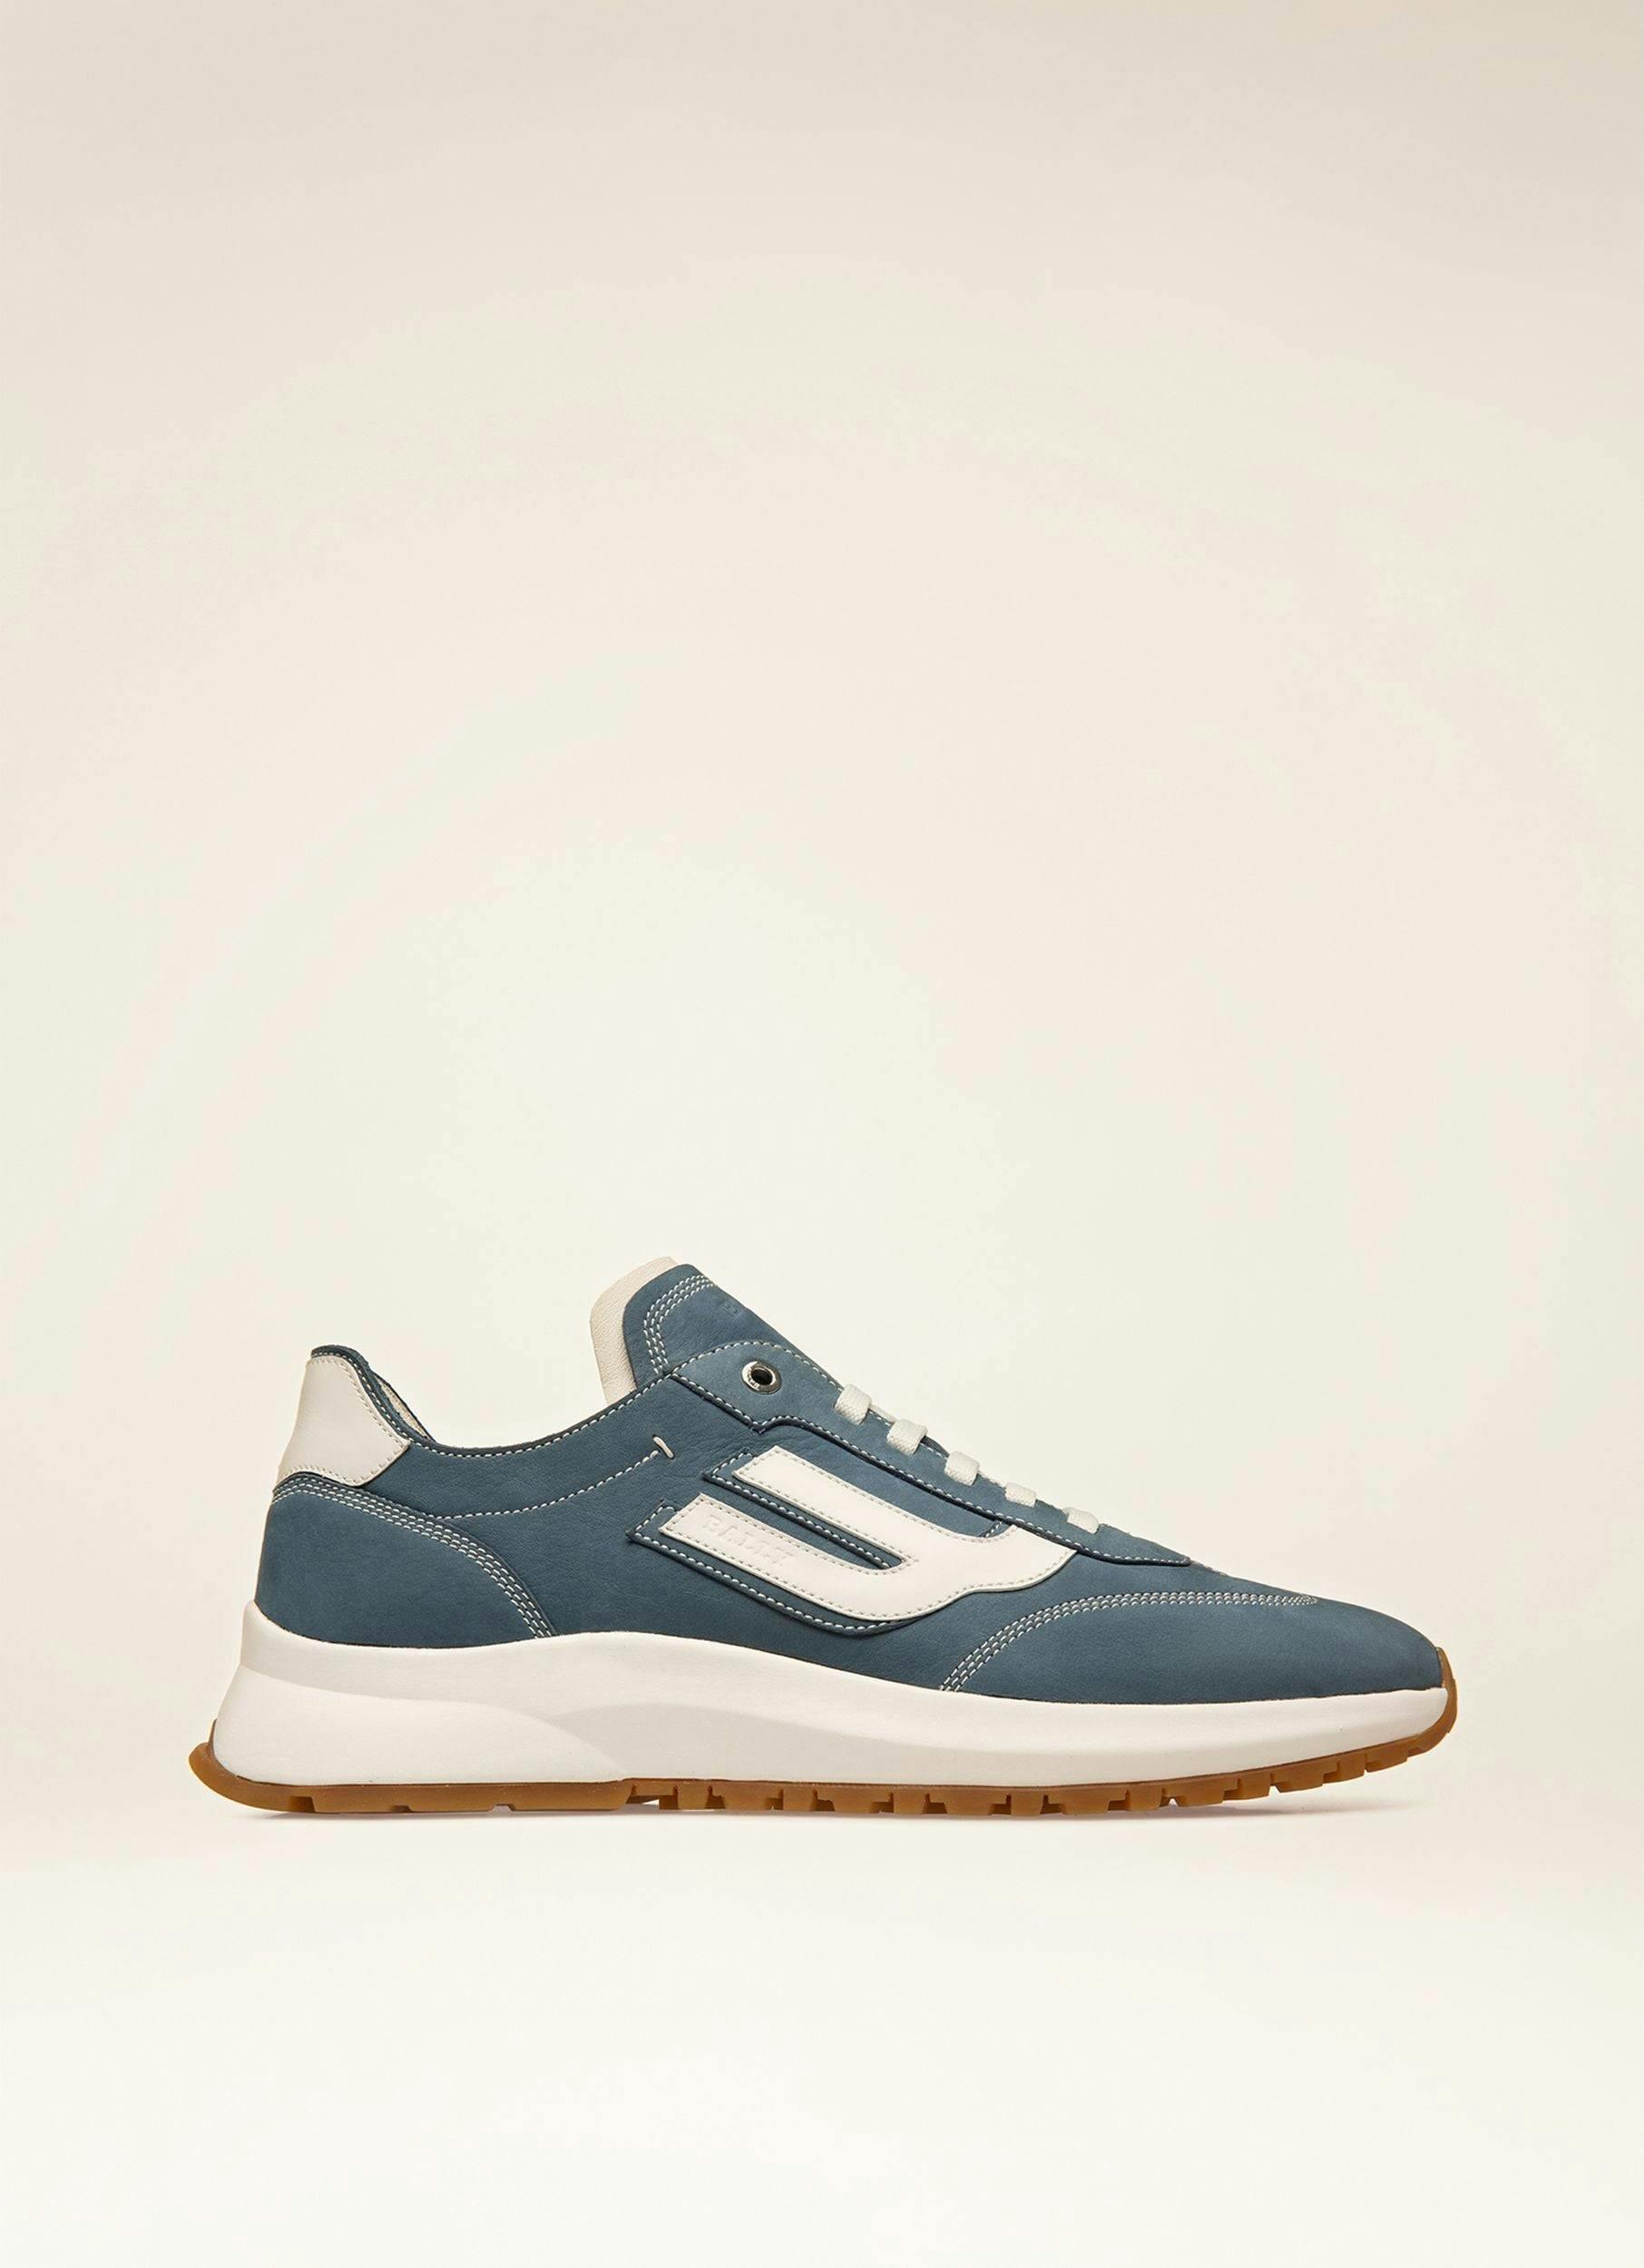 OUTLINE Leather Sneakers In Blue & White - Men's - Bally - 01